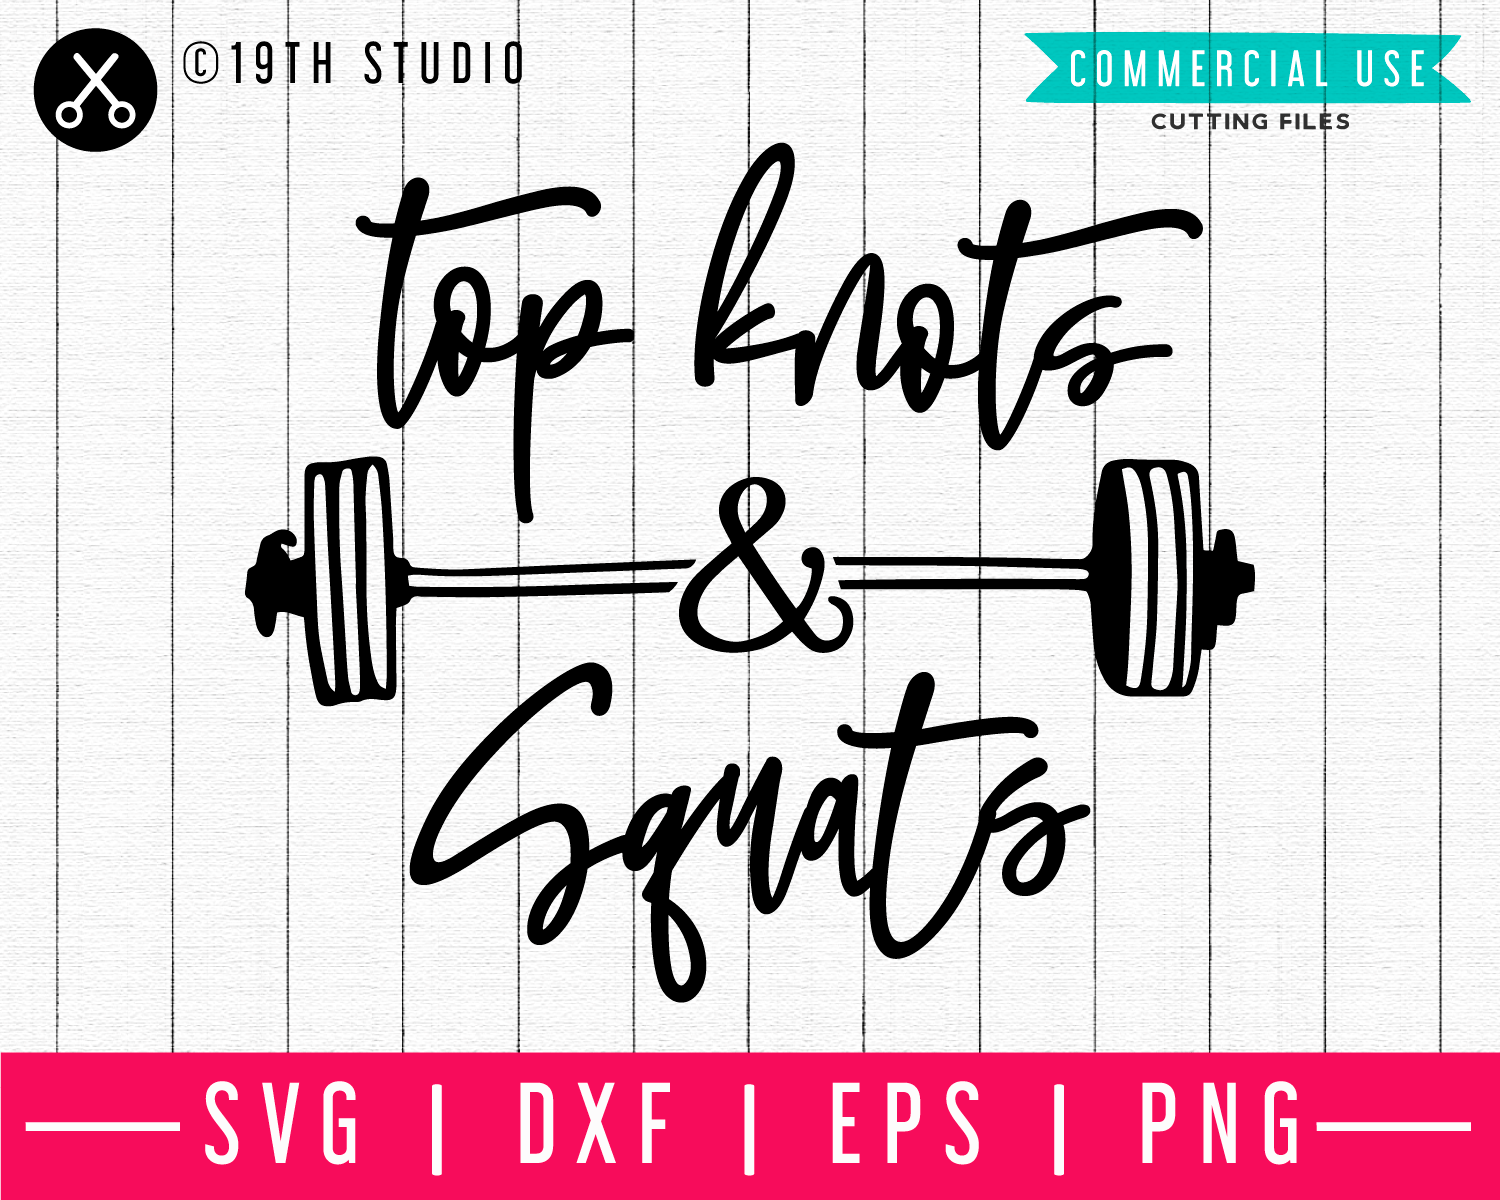 Top knots and squats SVG | A Gym SVG cut file | M44F Craft House SVG - SVG files for Cricut and Silhouette